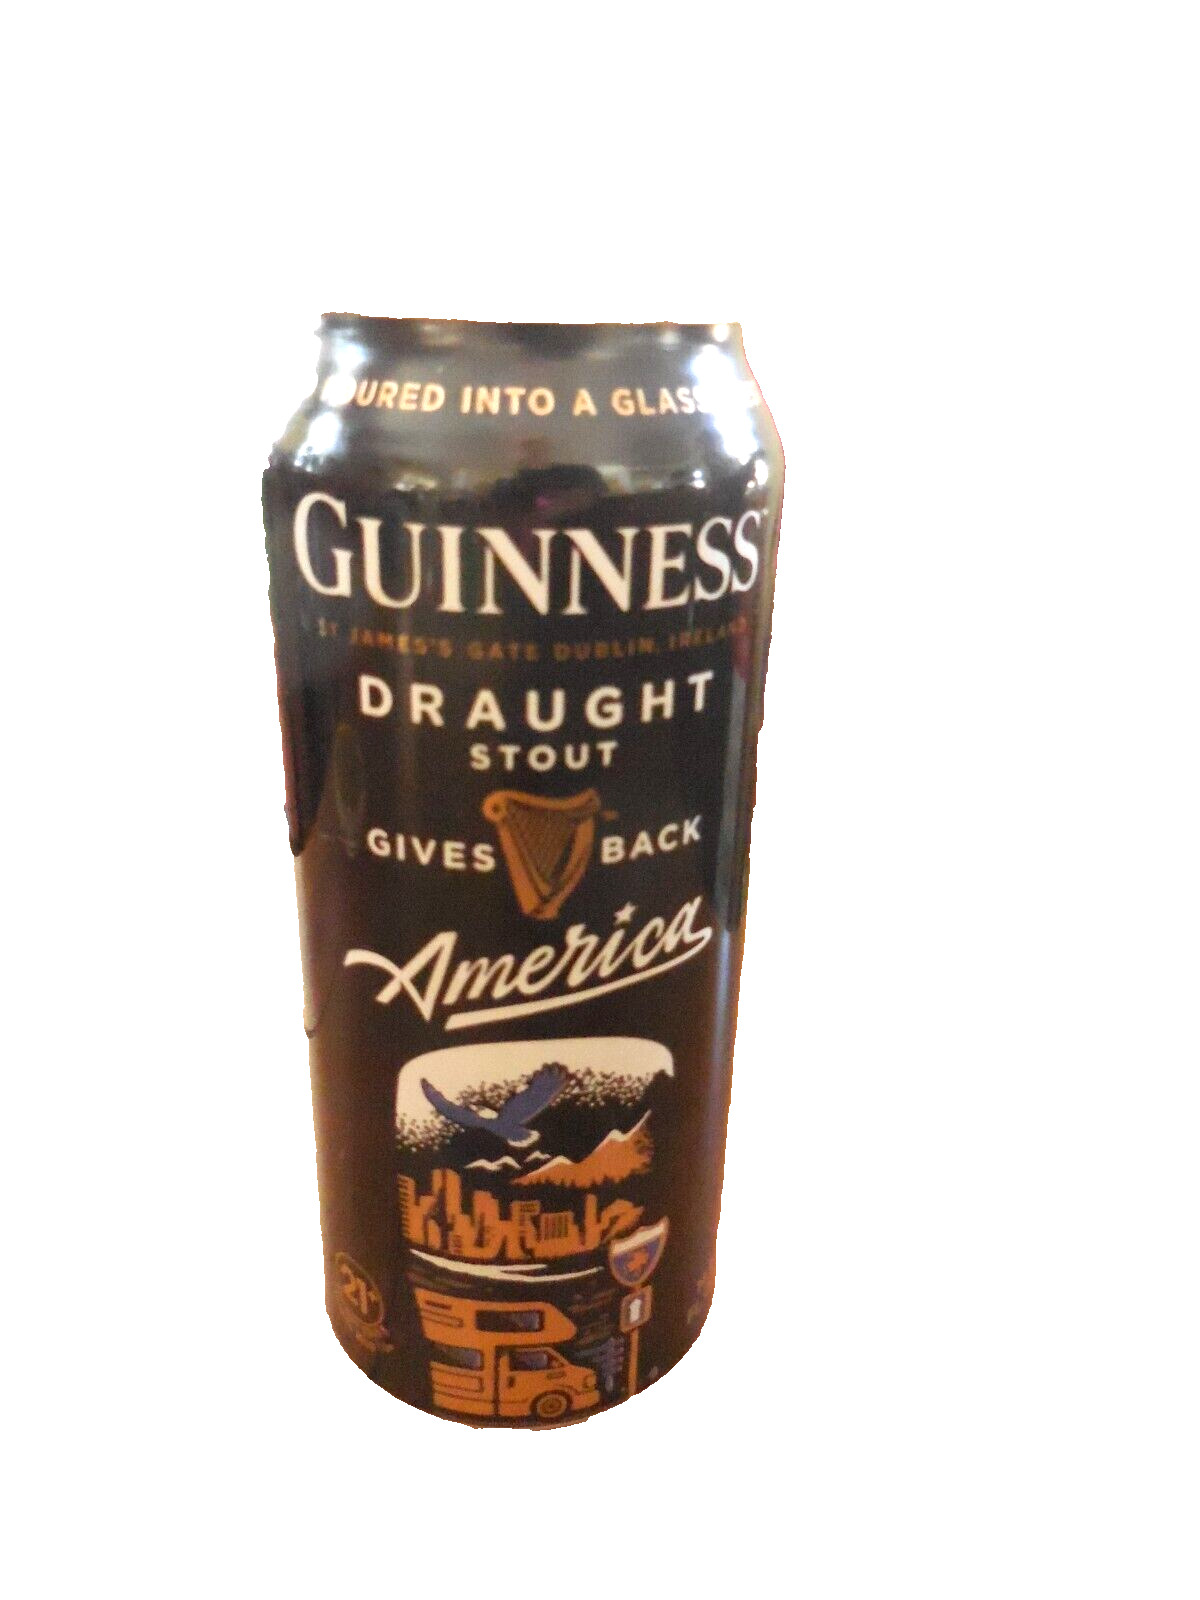 Guinness Draft Stout empty Can, Guinness Gives Back America